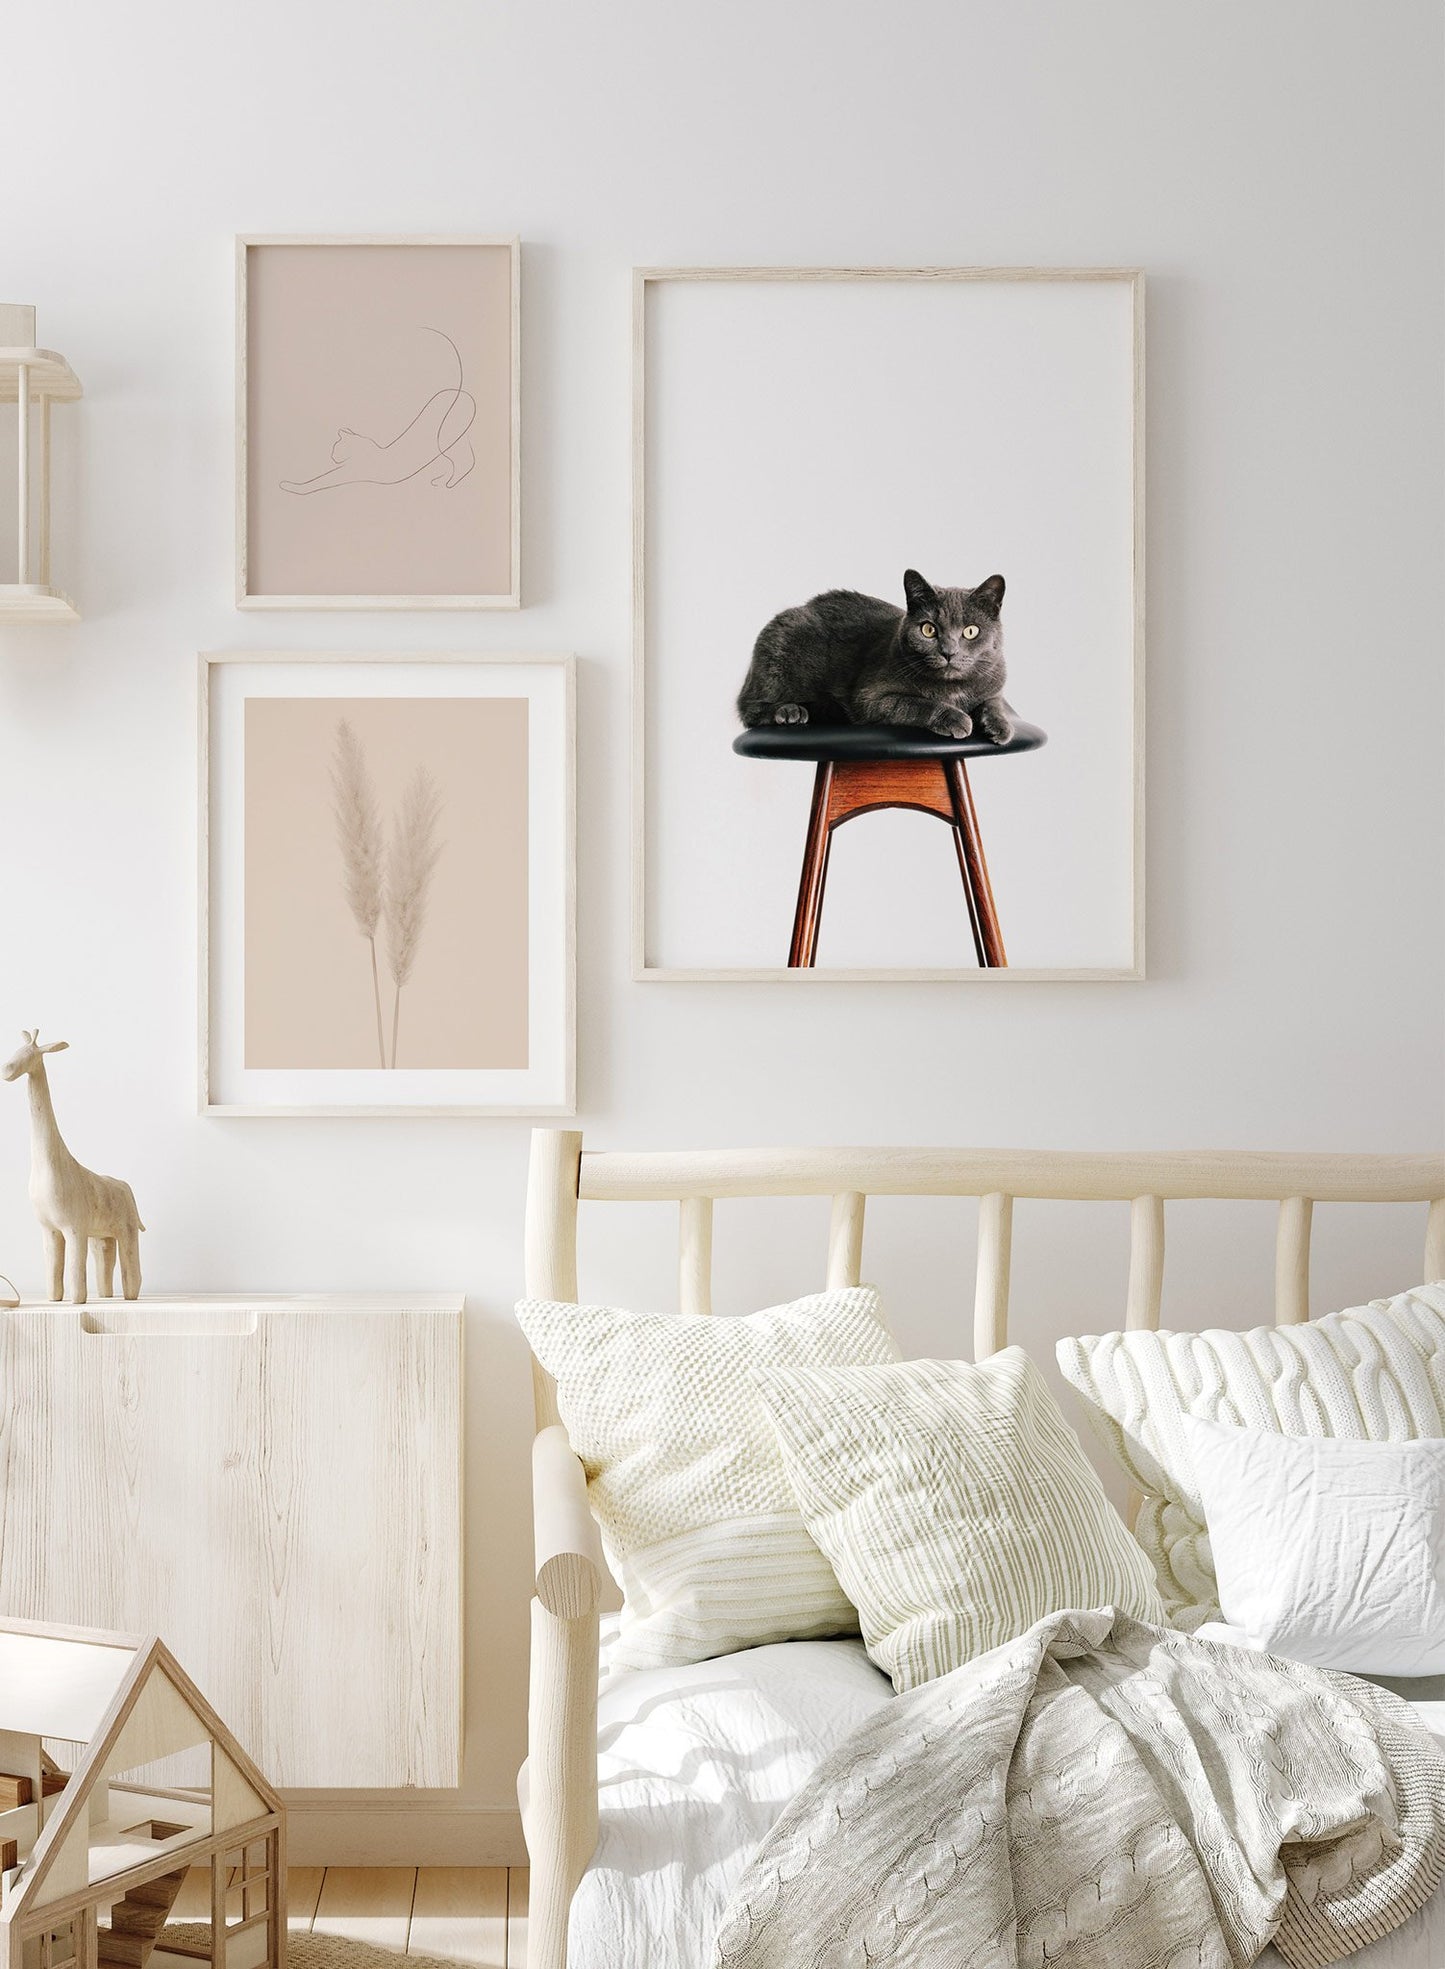 Kids nursery poster by Opposite Wall with photography of cat on chair - Lifestyle Trio - Kids Bedroom